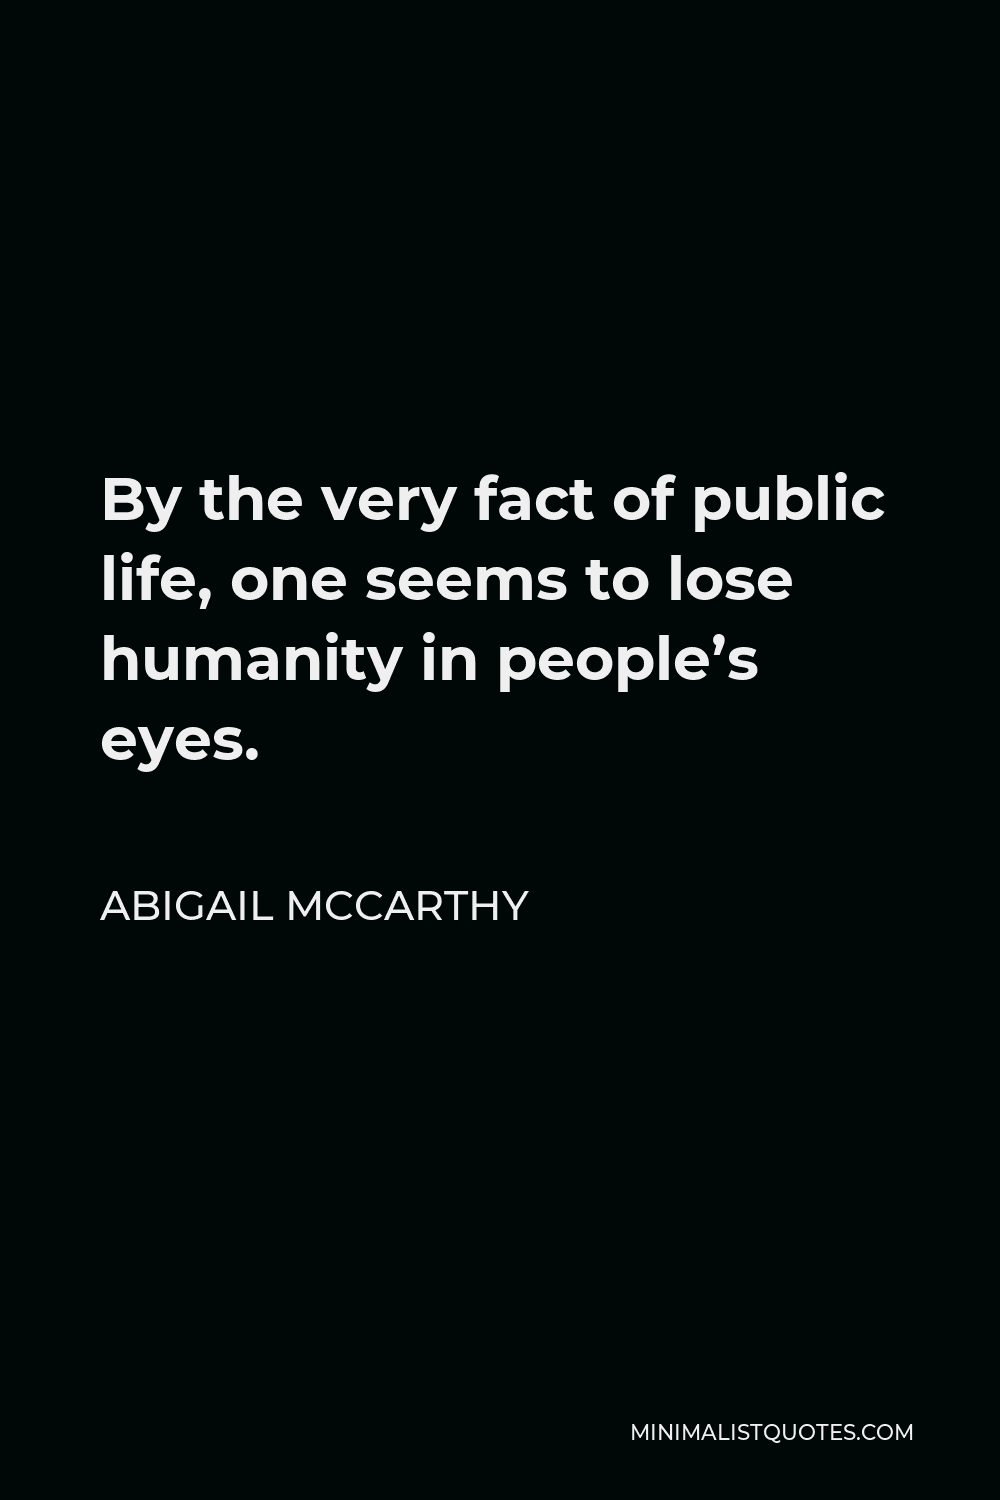 Abigail McCarthy Quote - By the very fact of public life, one seems to lose humanity in people’s eyes.